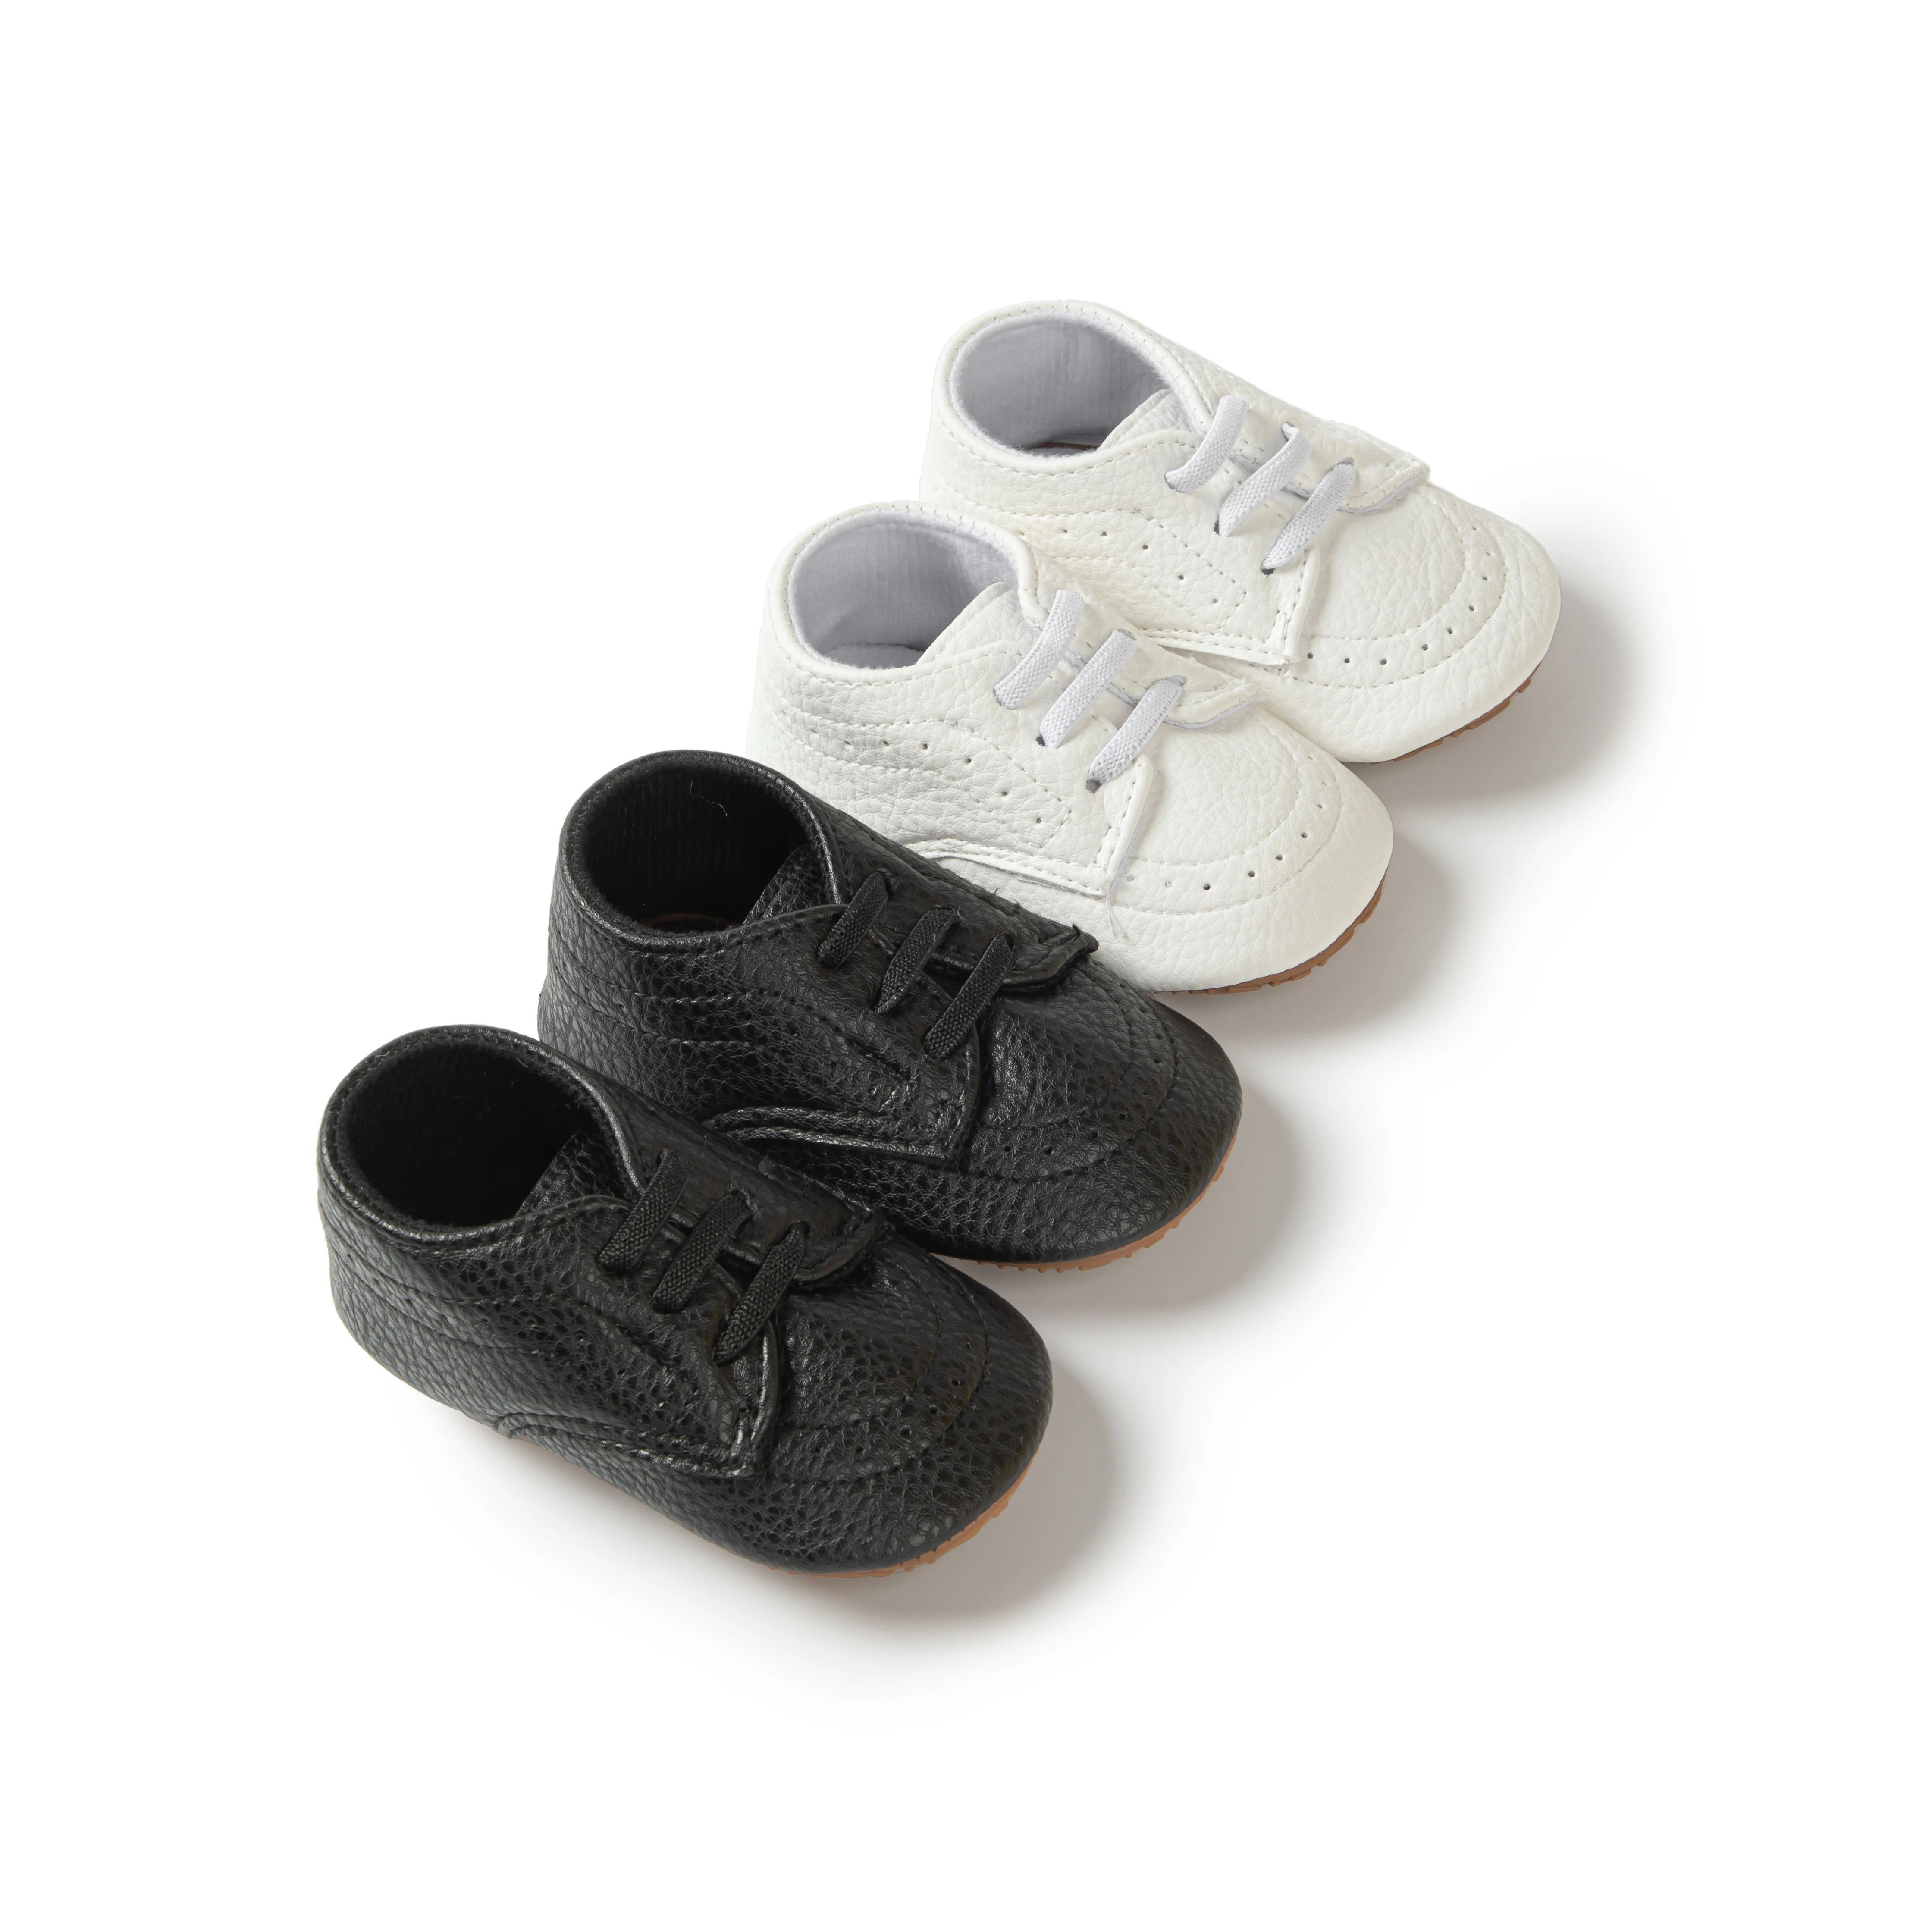 Fashion New Newborn Boy Outdoor Wedding Party PU Leather Breathable Rubber Non-Slip Baby Boy Shoes For Babies